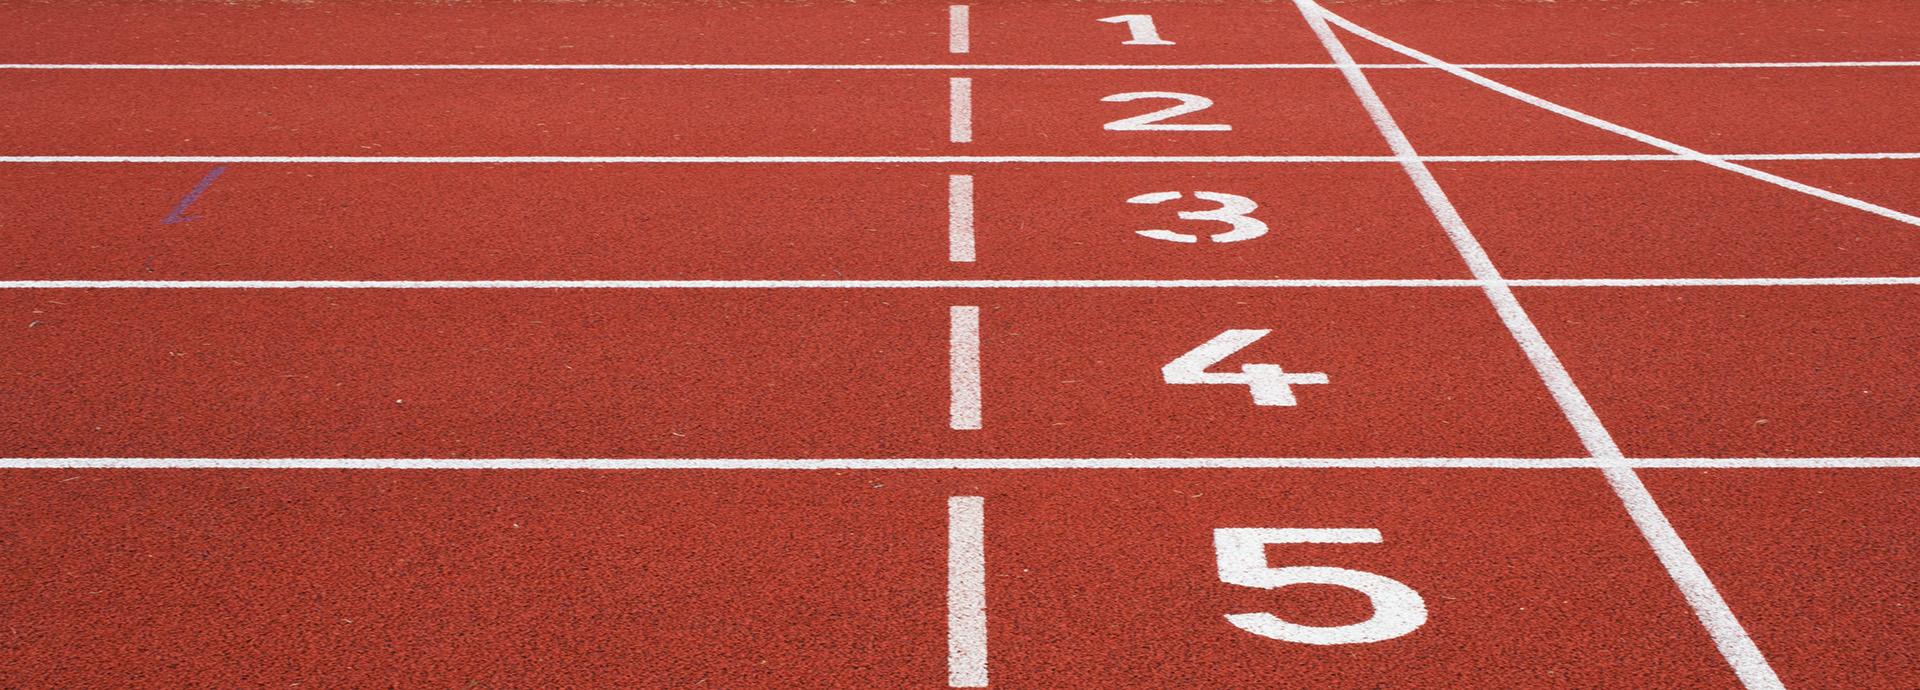 Starting line on a running track, showing numbers from 1 to 5.